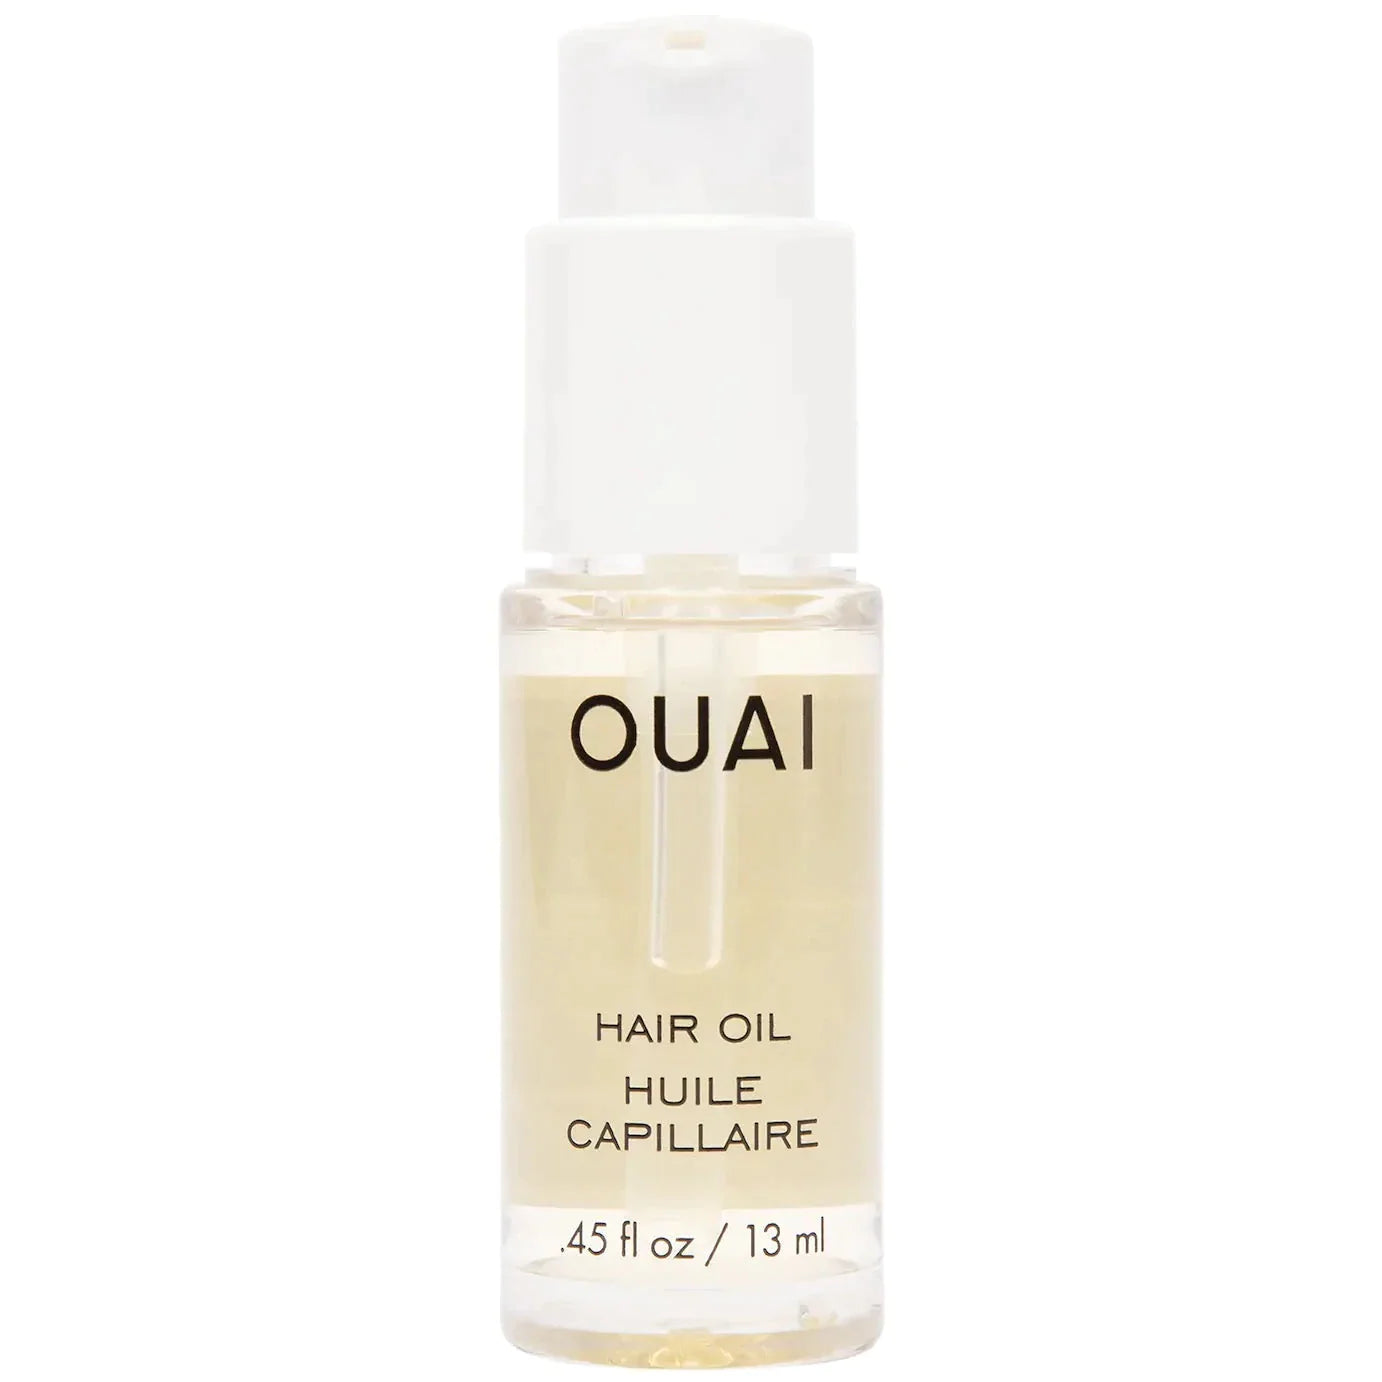 Small clear vile of hair oil with white pump